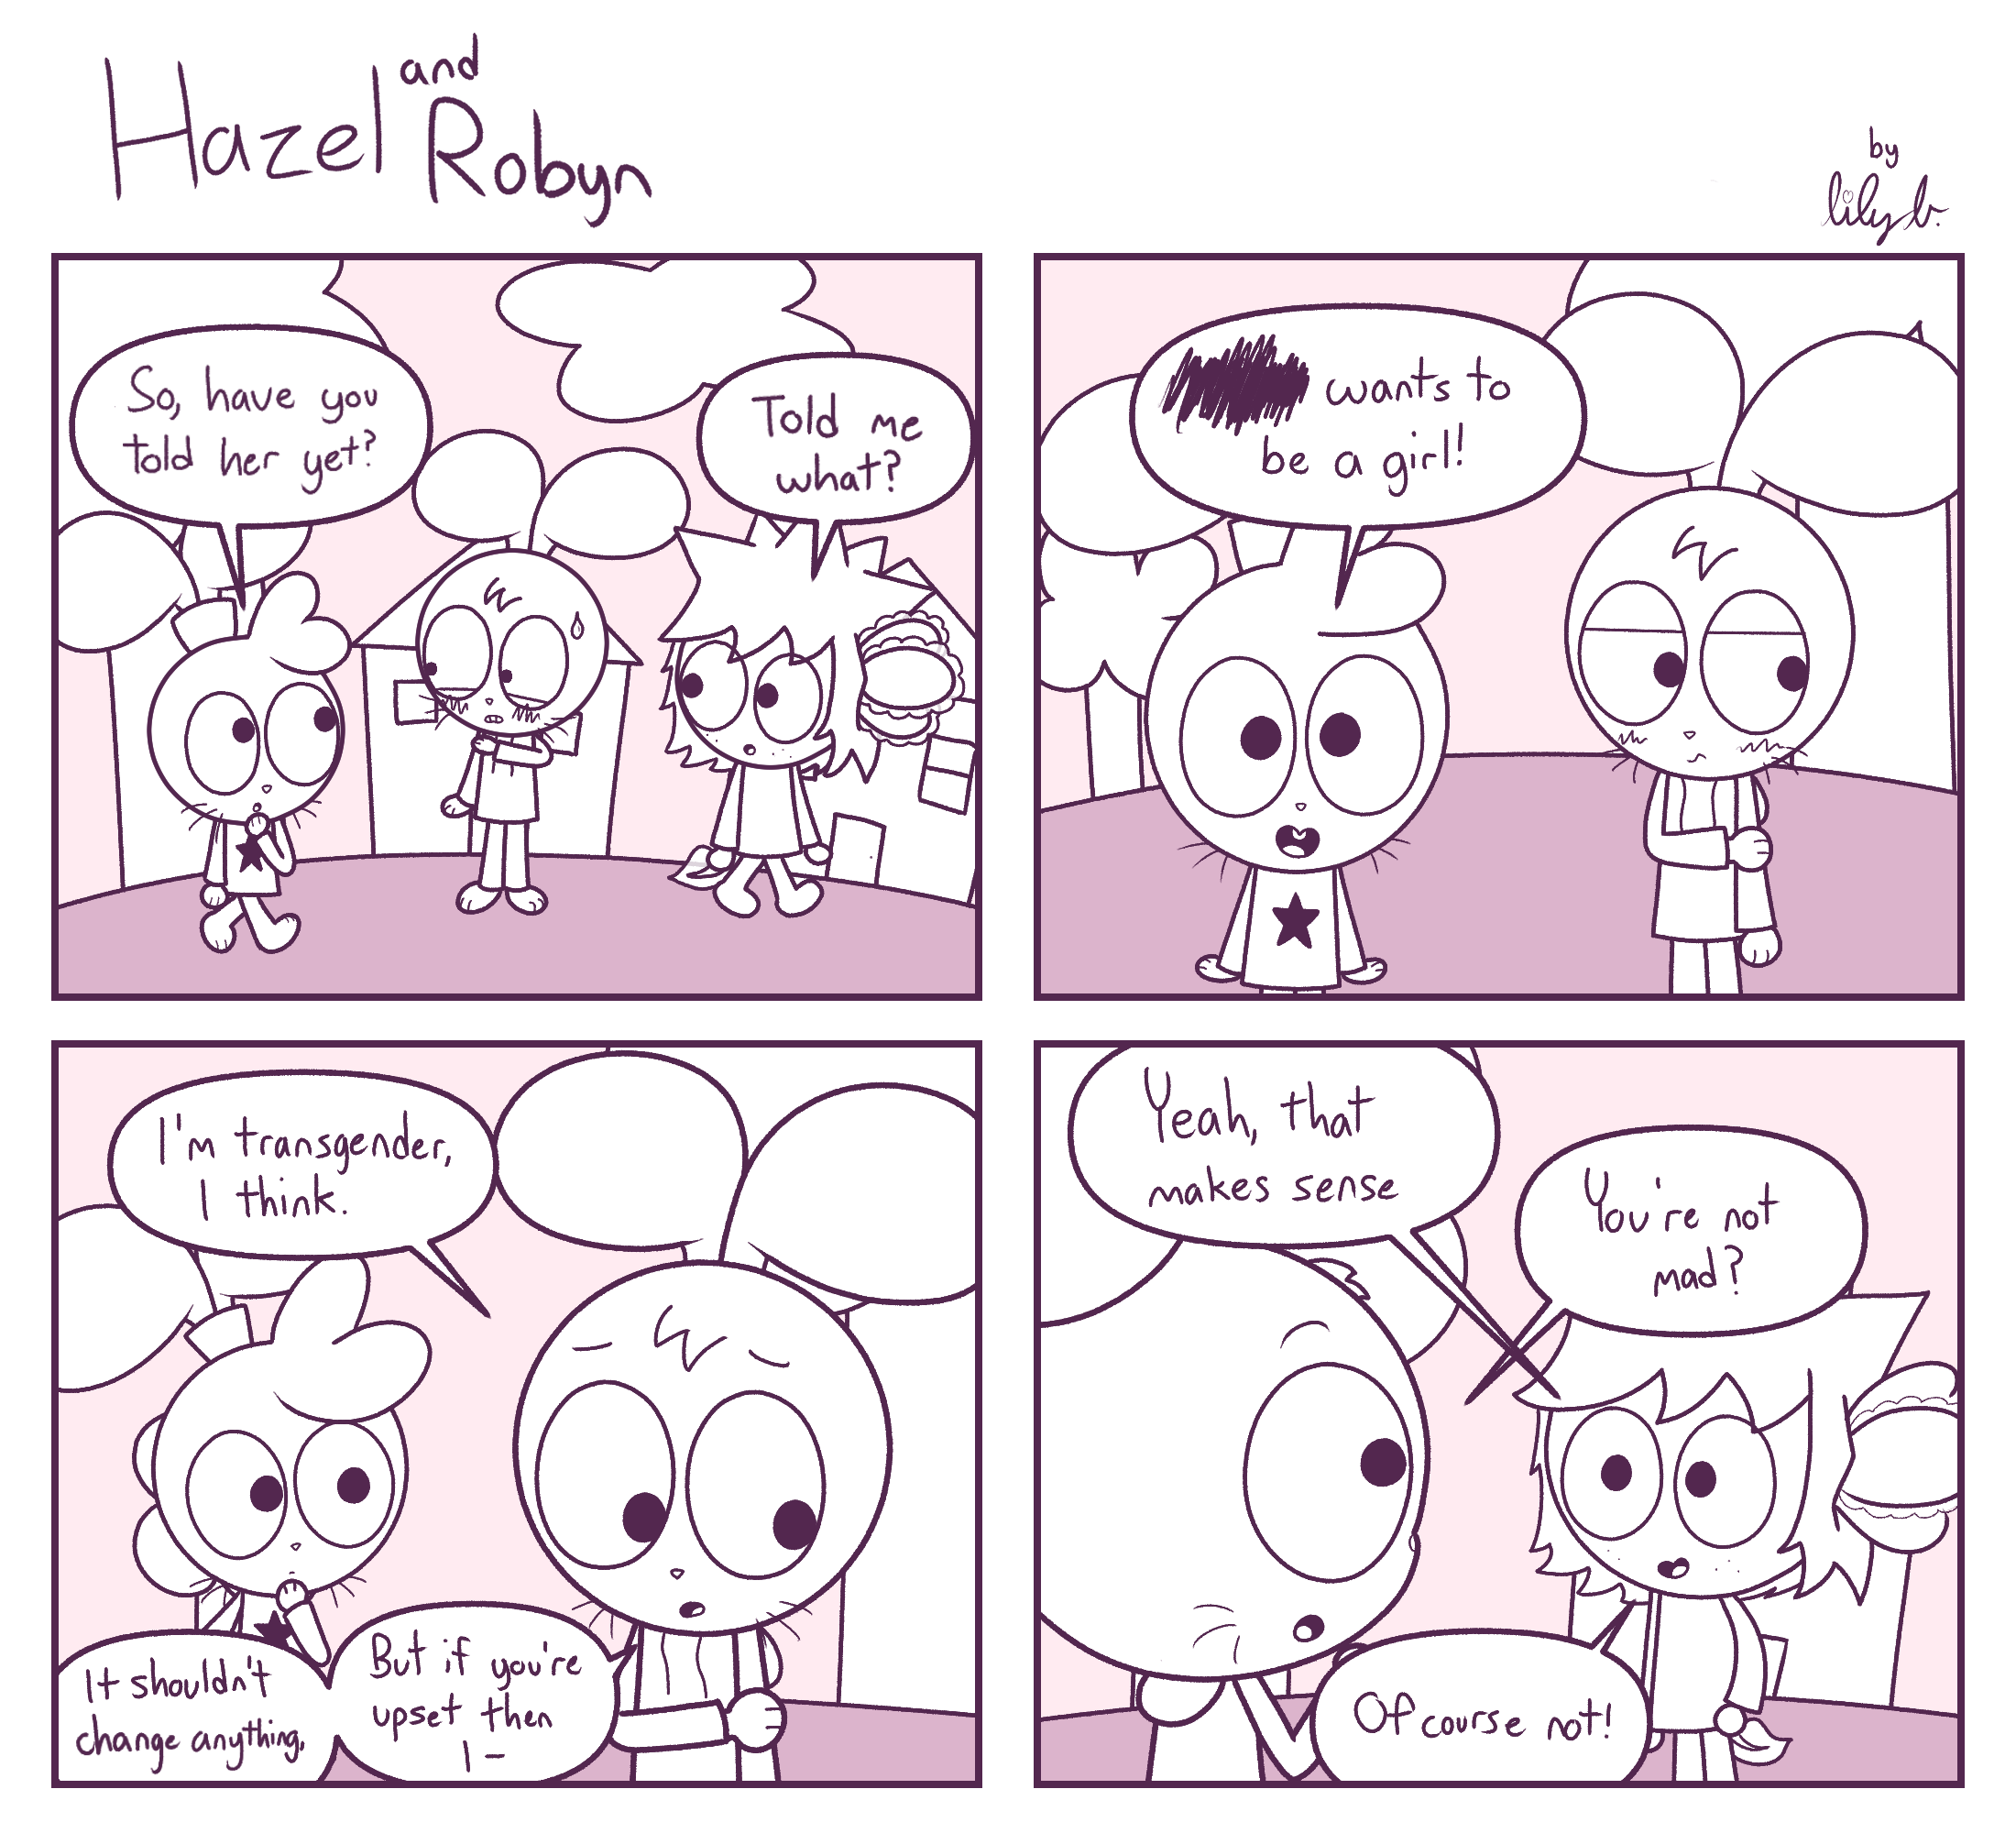 Panel 1: Robyn: So, have you told her yet? / Tapioca: Told me what? | Panel 2: Robyn: [redacted] wants to be a girl! | Panel 3: Hazel: I'm transgender, I think. It shouldn't change anything, but if you're upset then I- | Panel 4: Tapioca: Yeah that makes sense / Hazel: You're not mad? / Tapioca: Of course not!